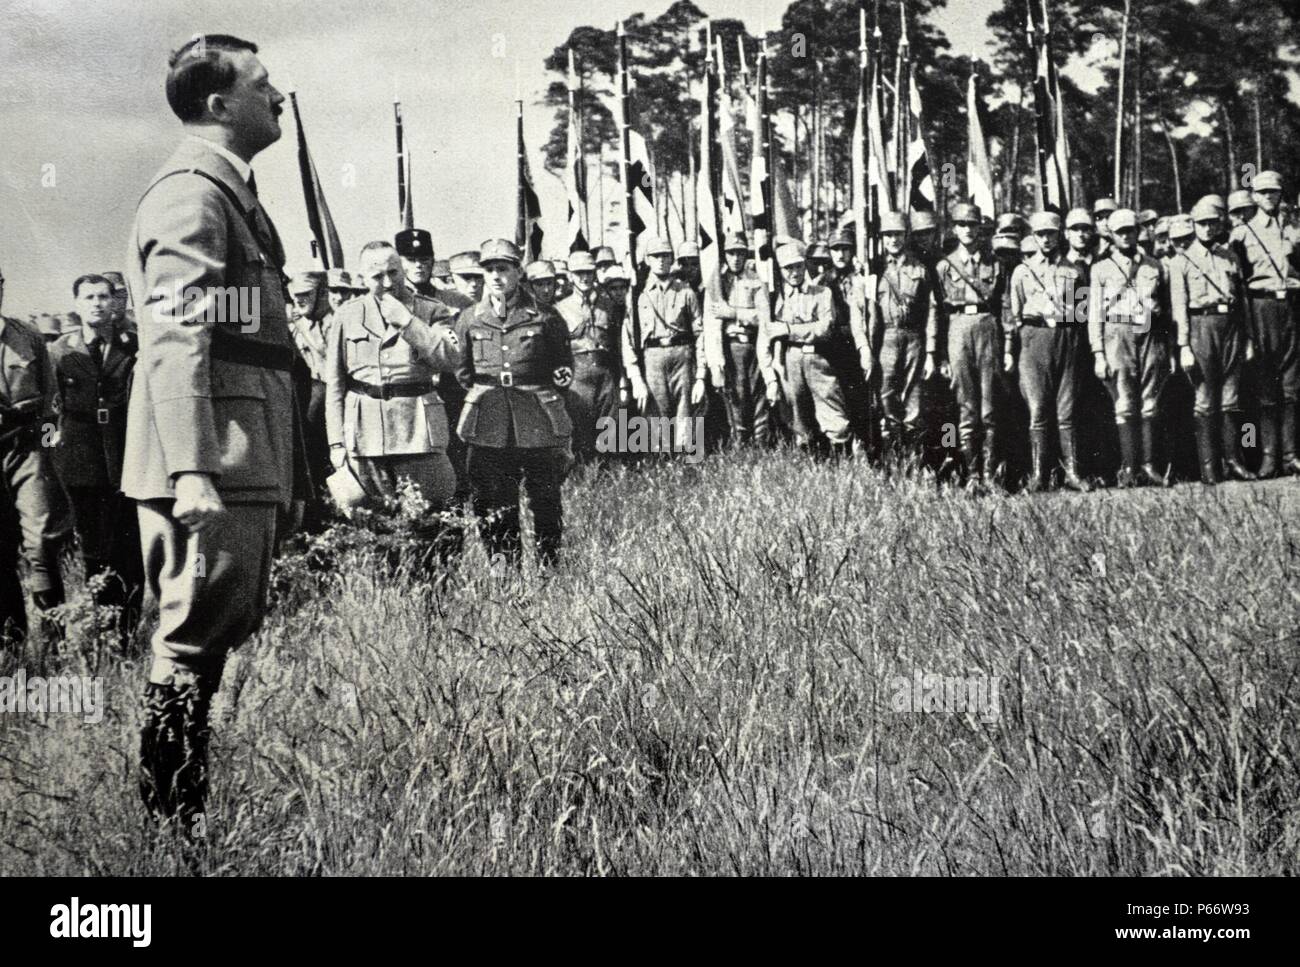 Adolf Hitler 1889-1945. addresses a rally of Nazi recruits in Bernau. German politician and the leader of the Nazi Party. He was chancellor of Germany from 1933 to 1945 and dictator of Nazi Germany from 1934 to 1945. Stock Photo